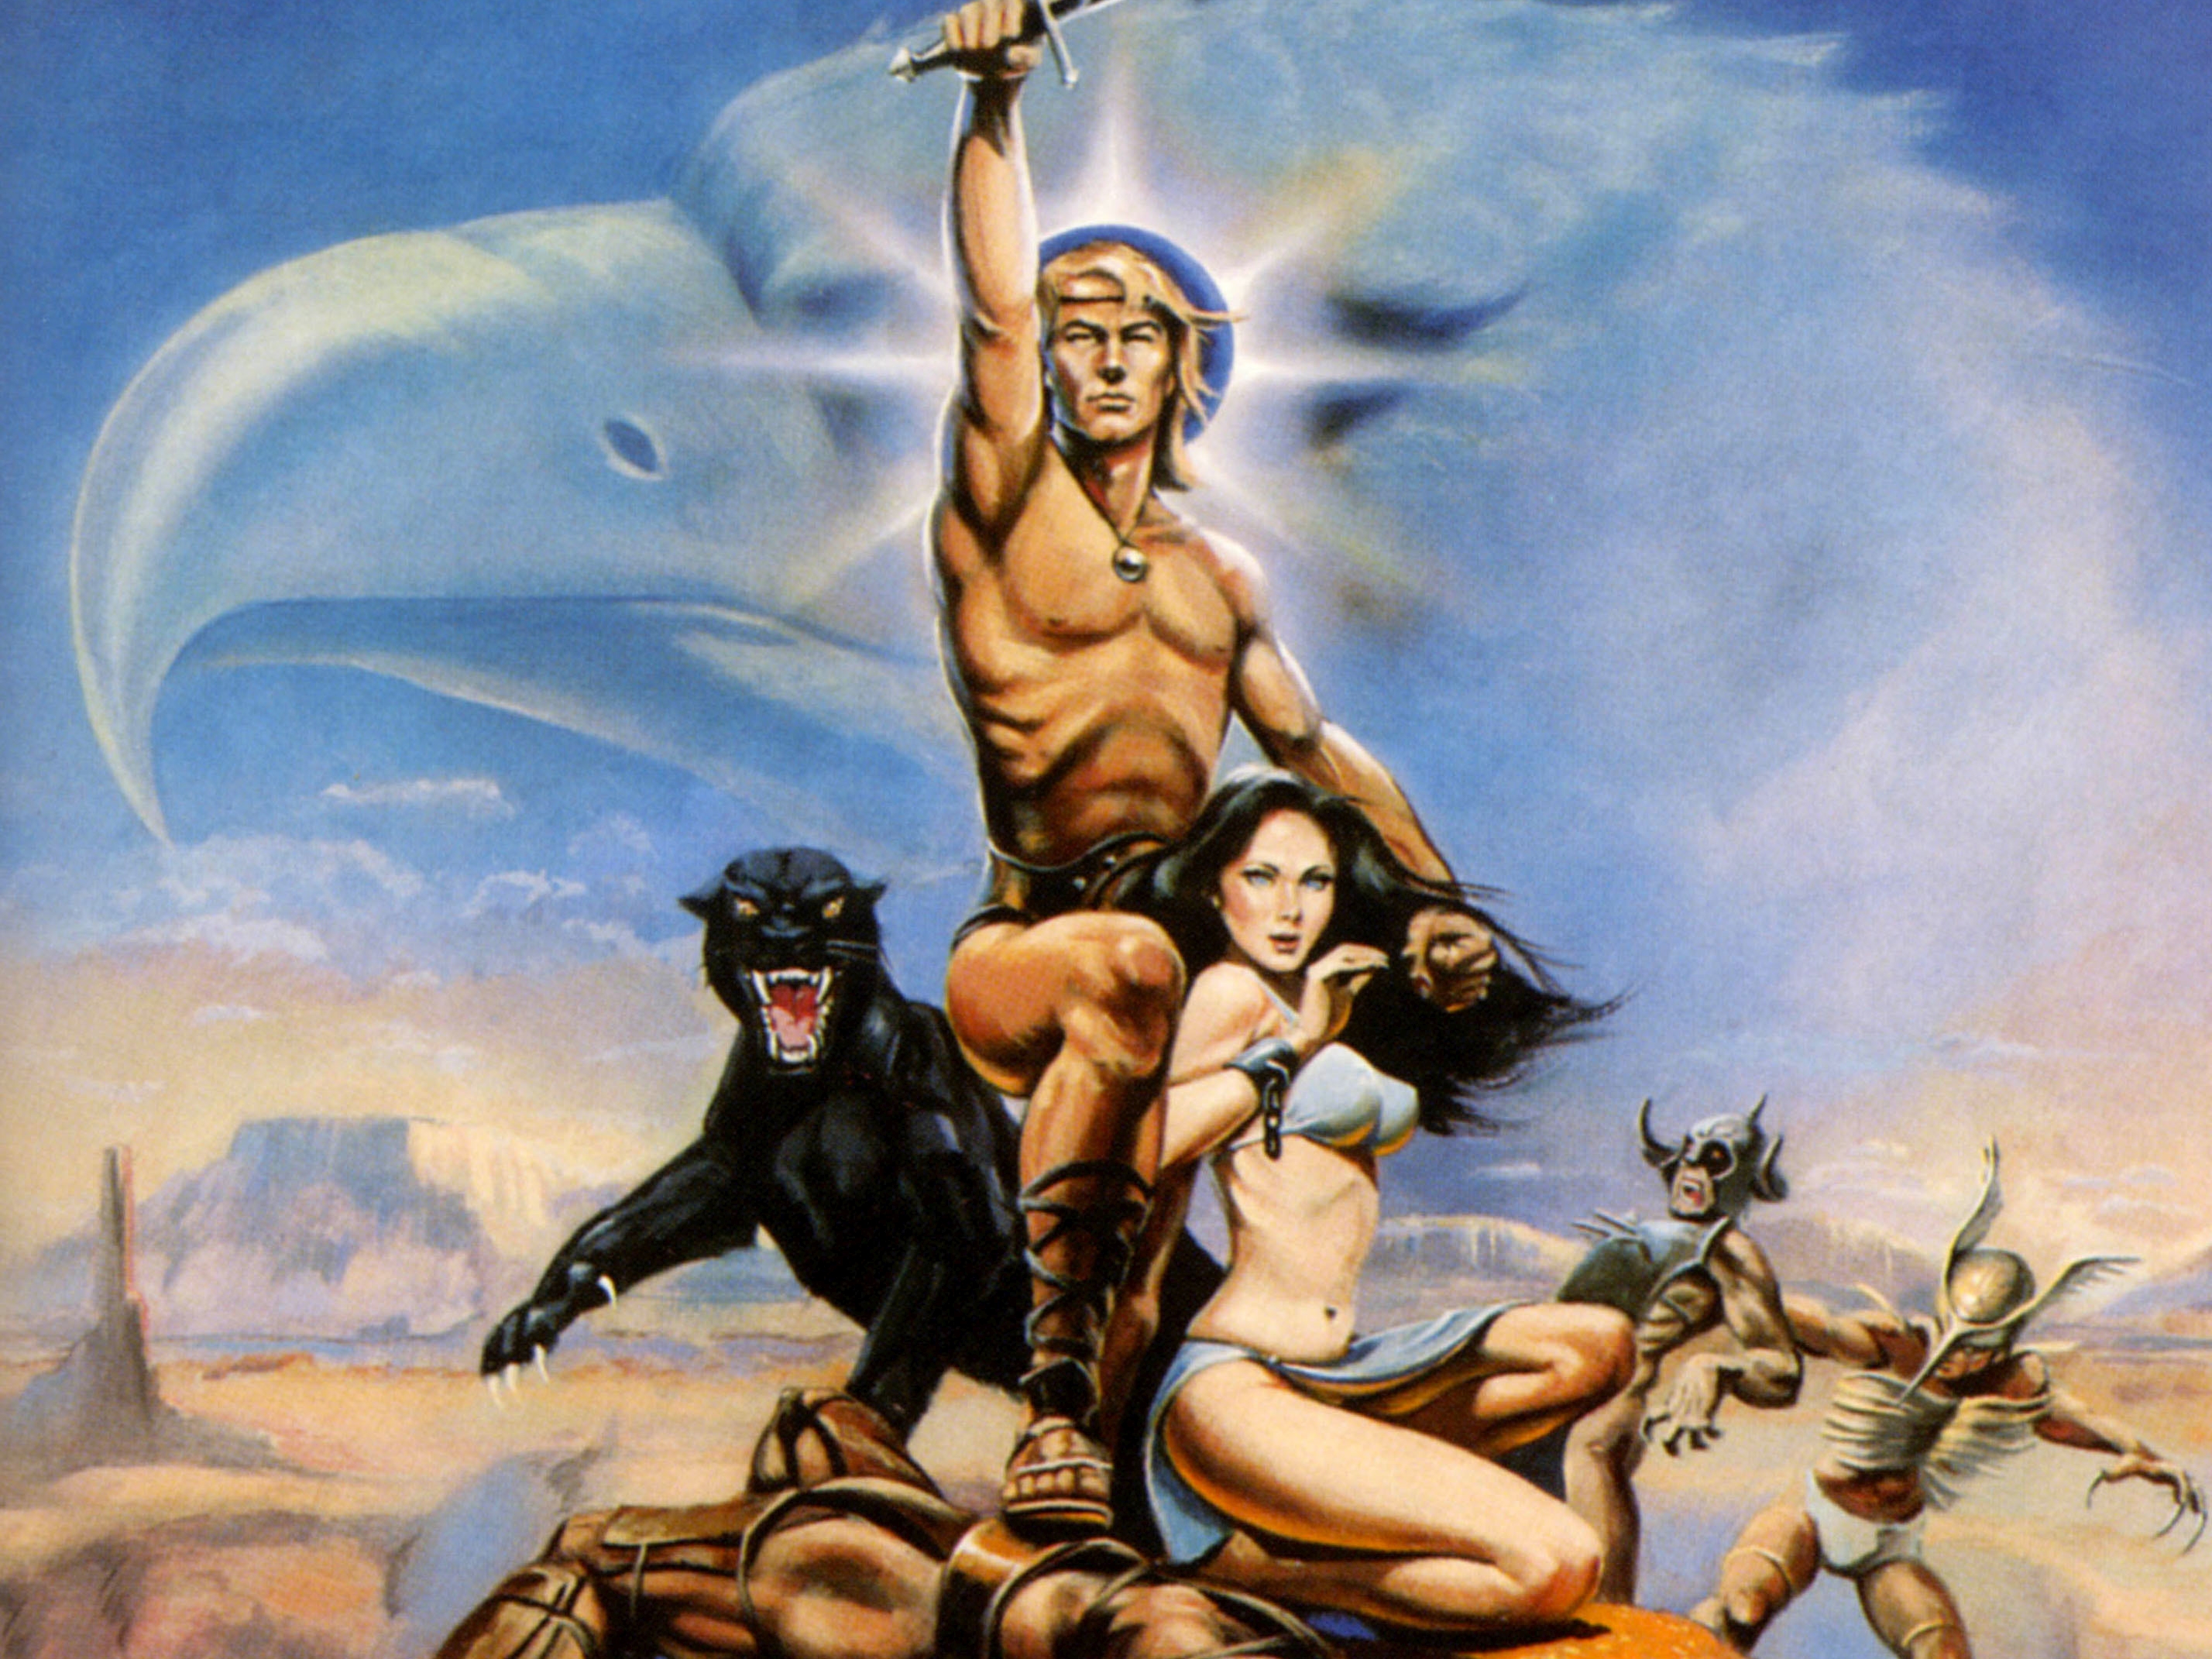 Comics The Beastmaster HD Wallpaper Background Image. the beastmaster Wallp...